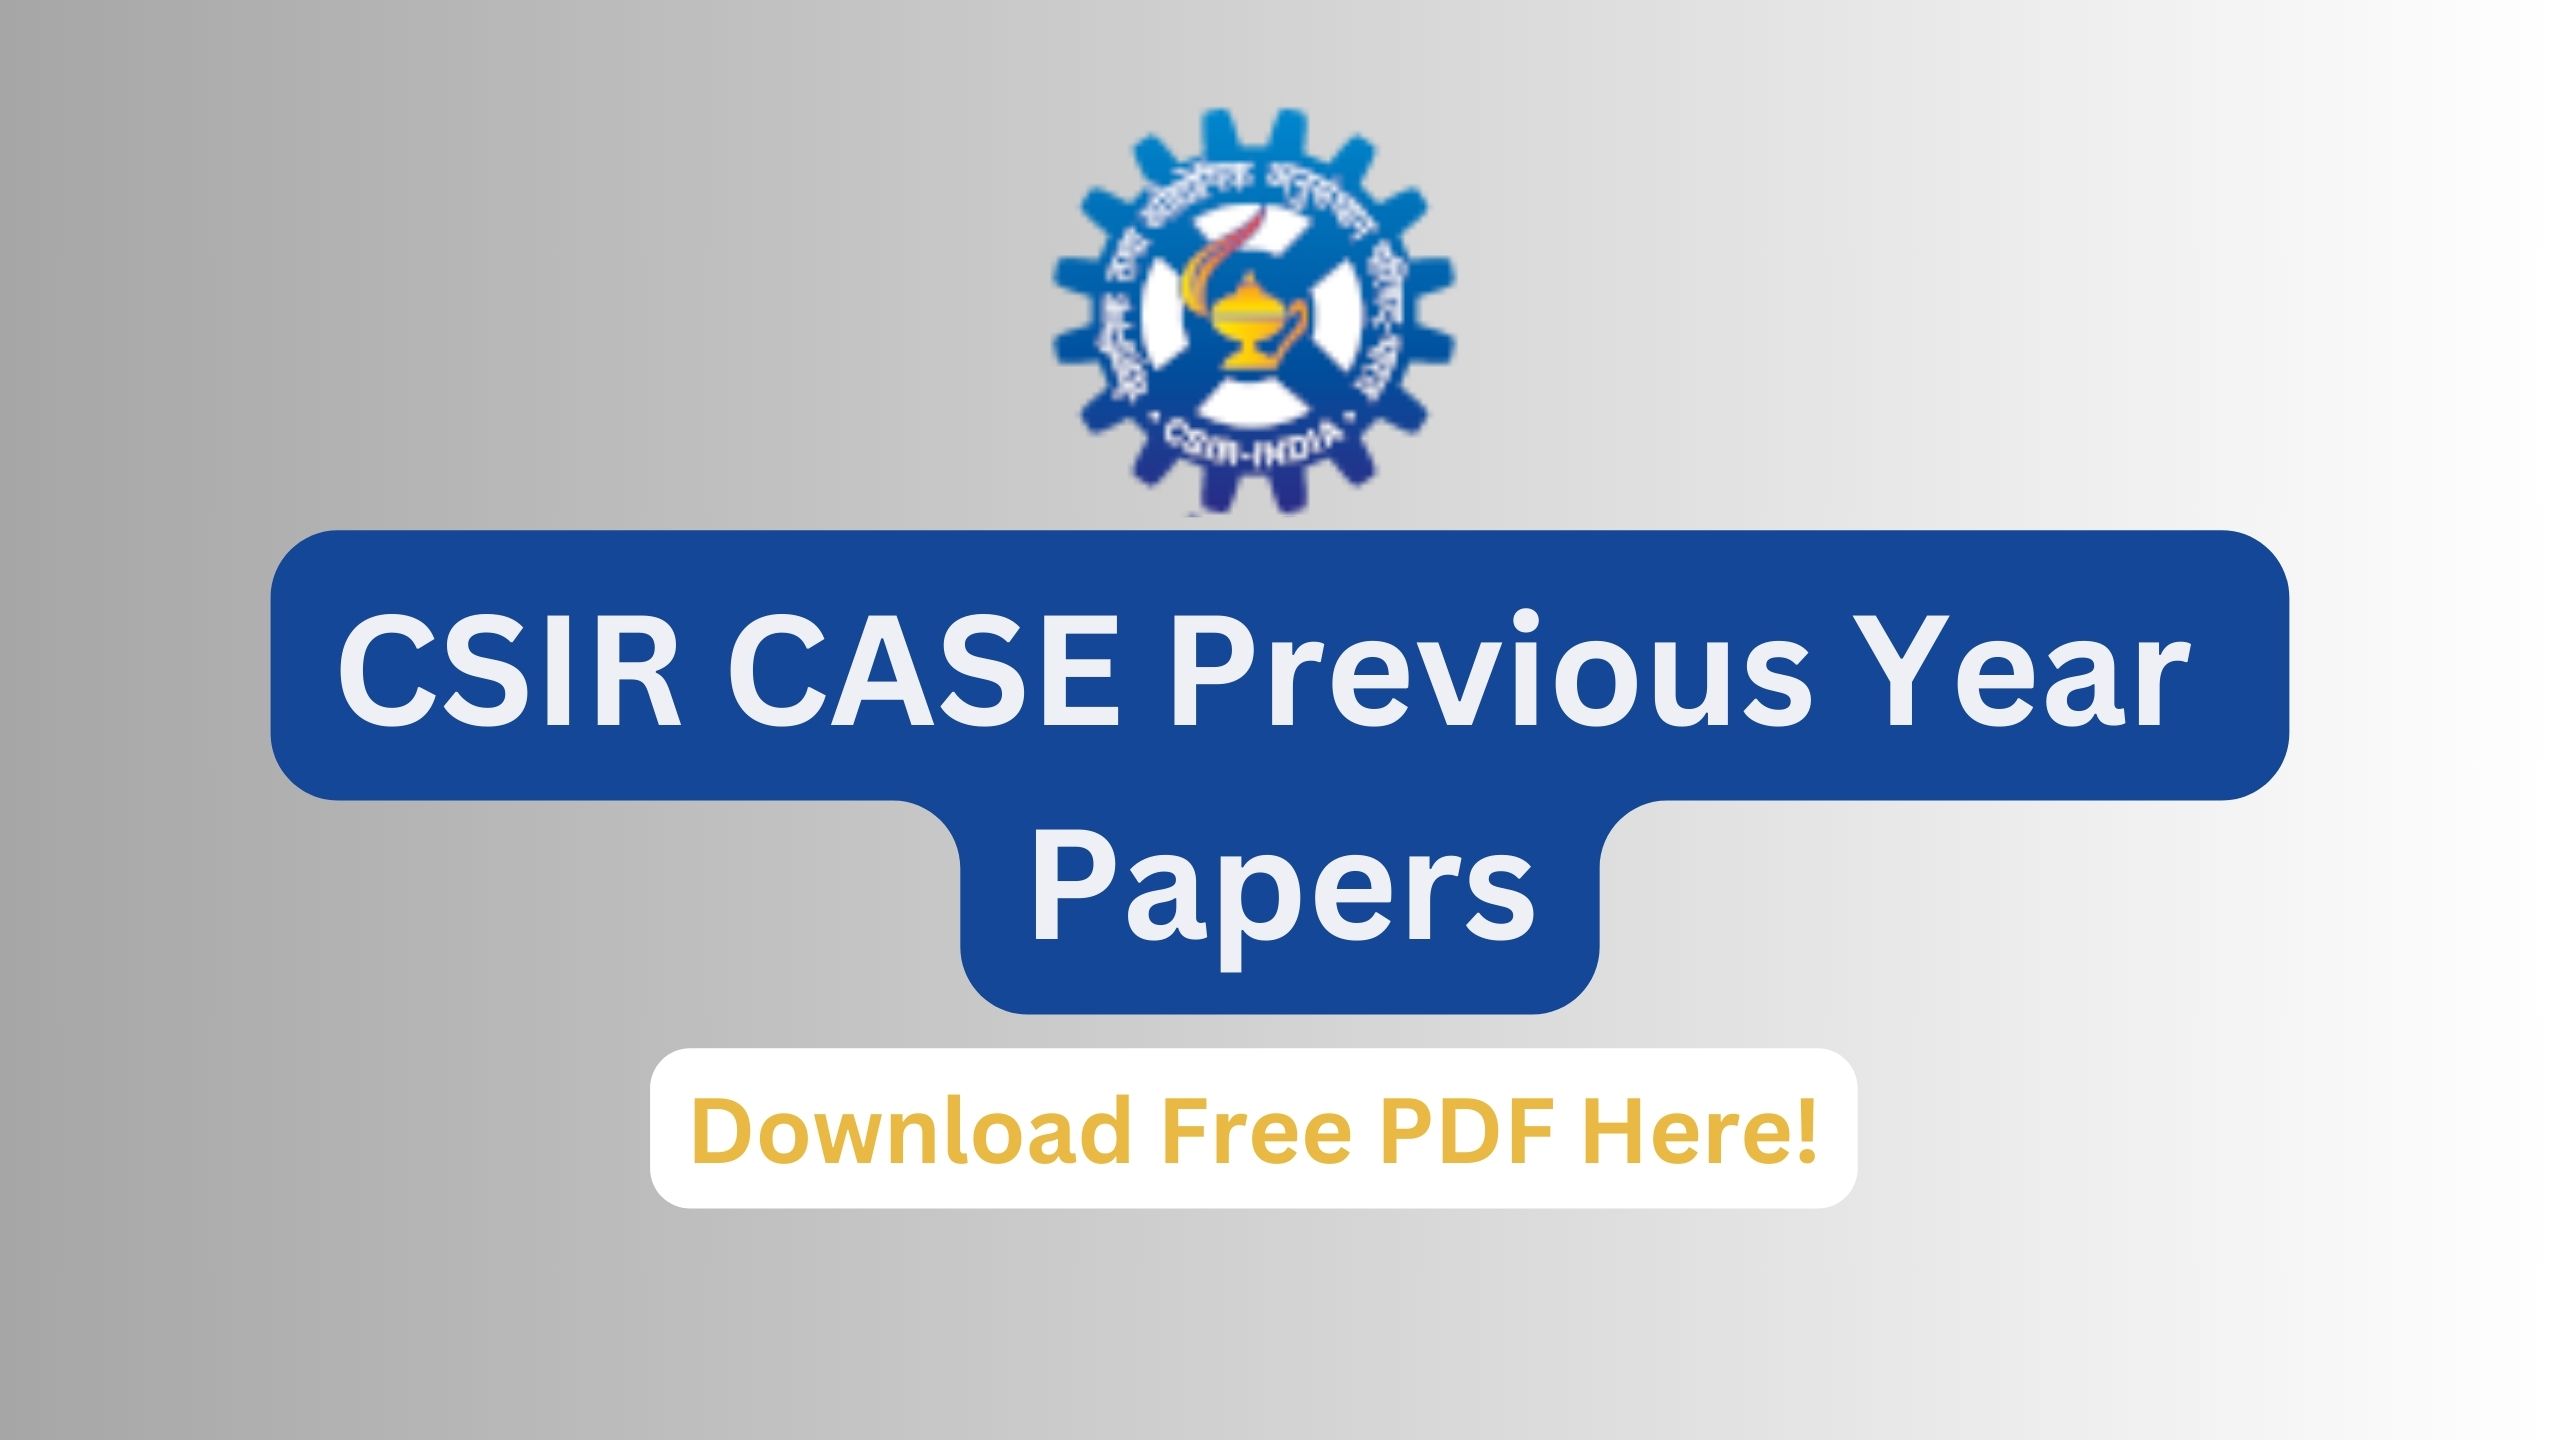 CSIR CASE Previous Year Papers